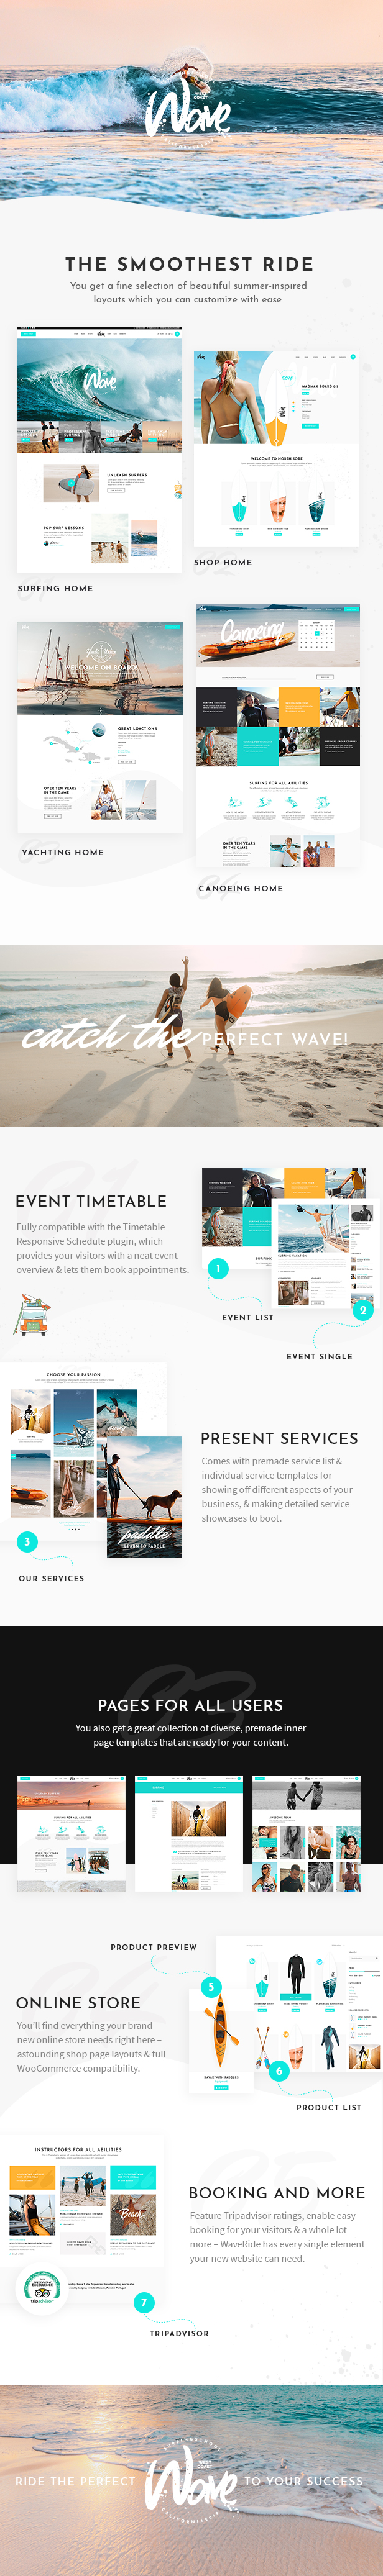 WaveRide - Surfing and Water Sports Theme - 1